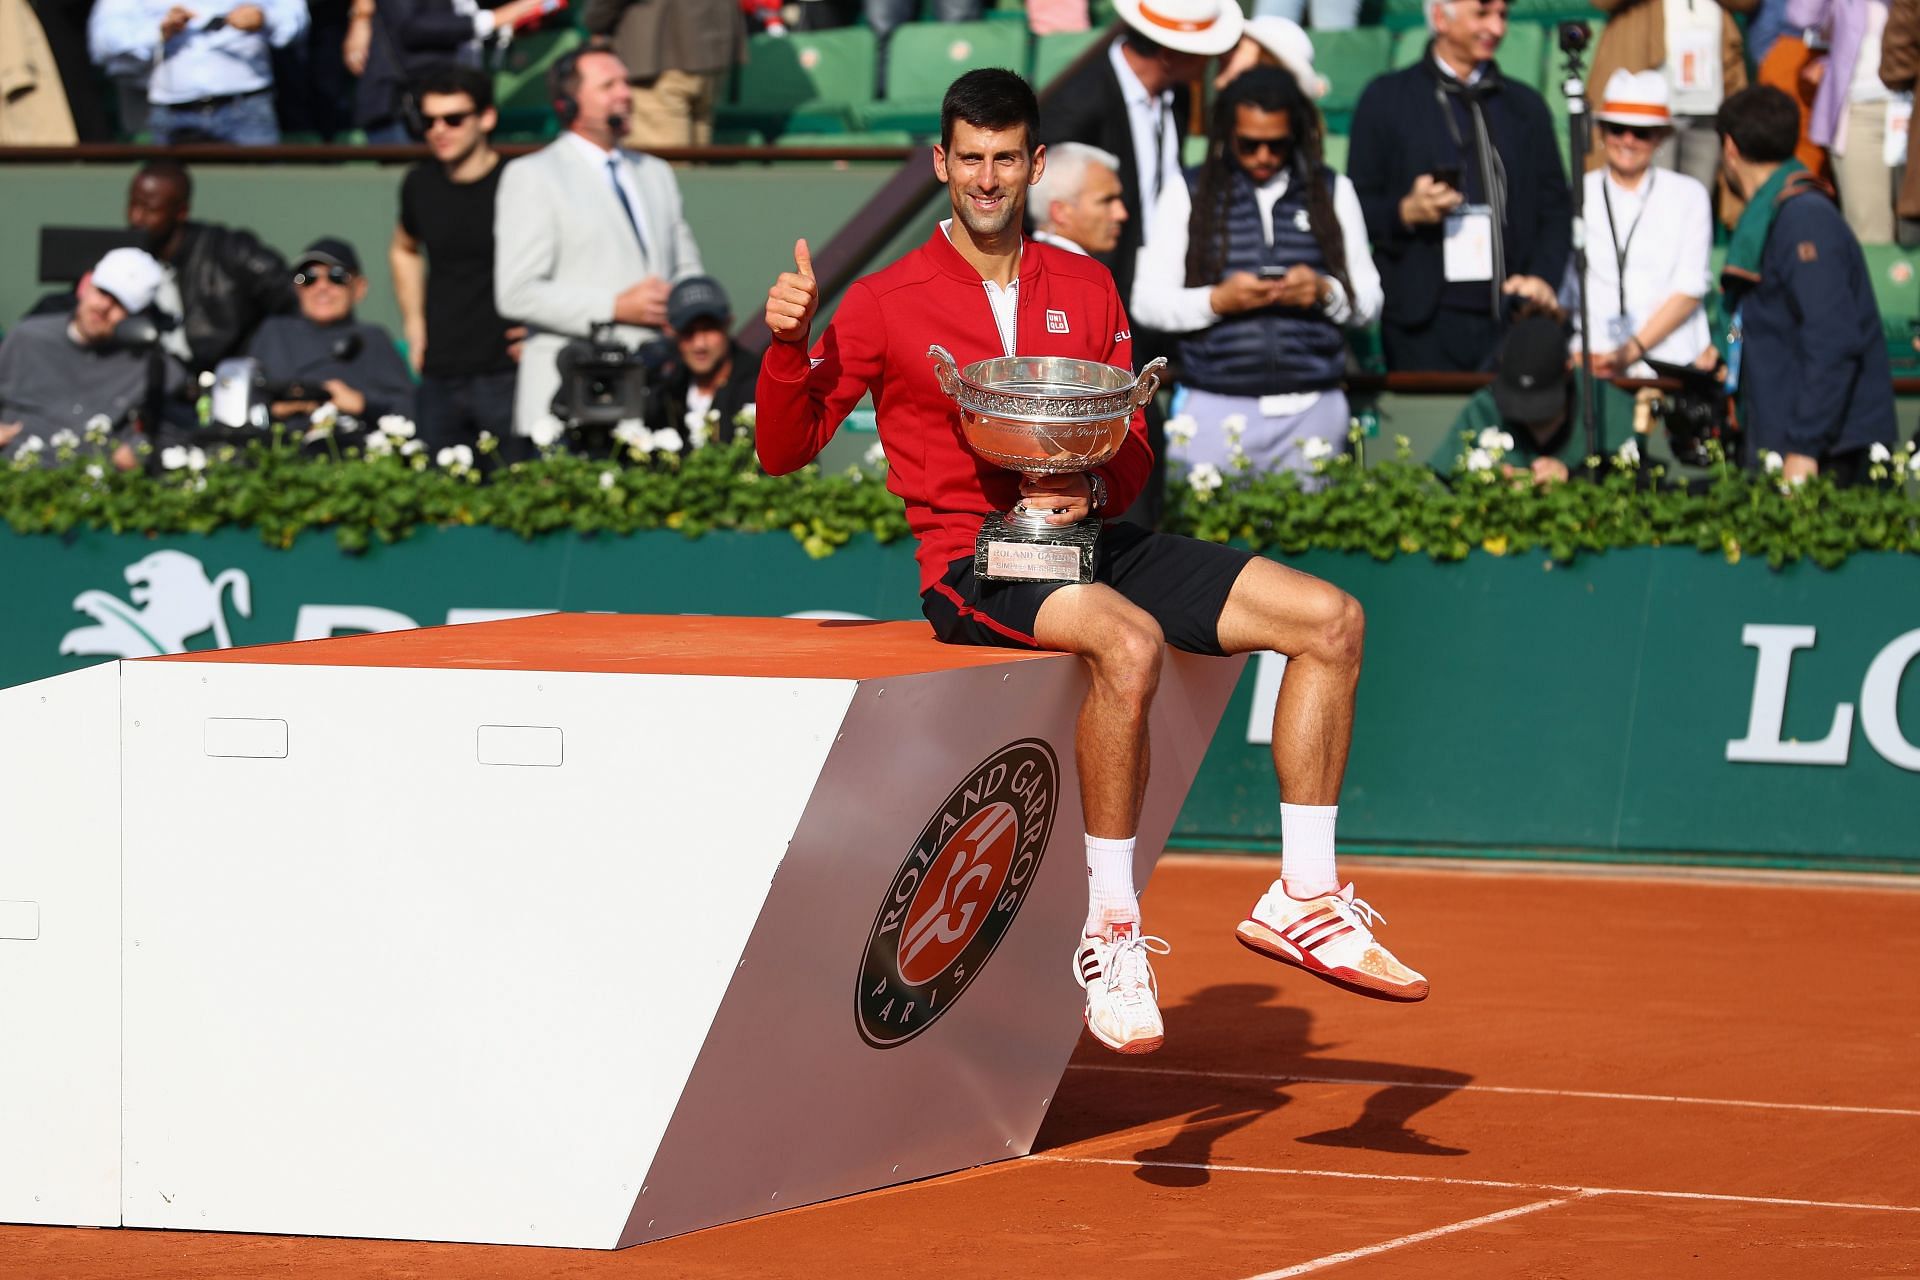 Novak Djokovic won his first-ever French Open title in 2016